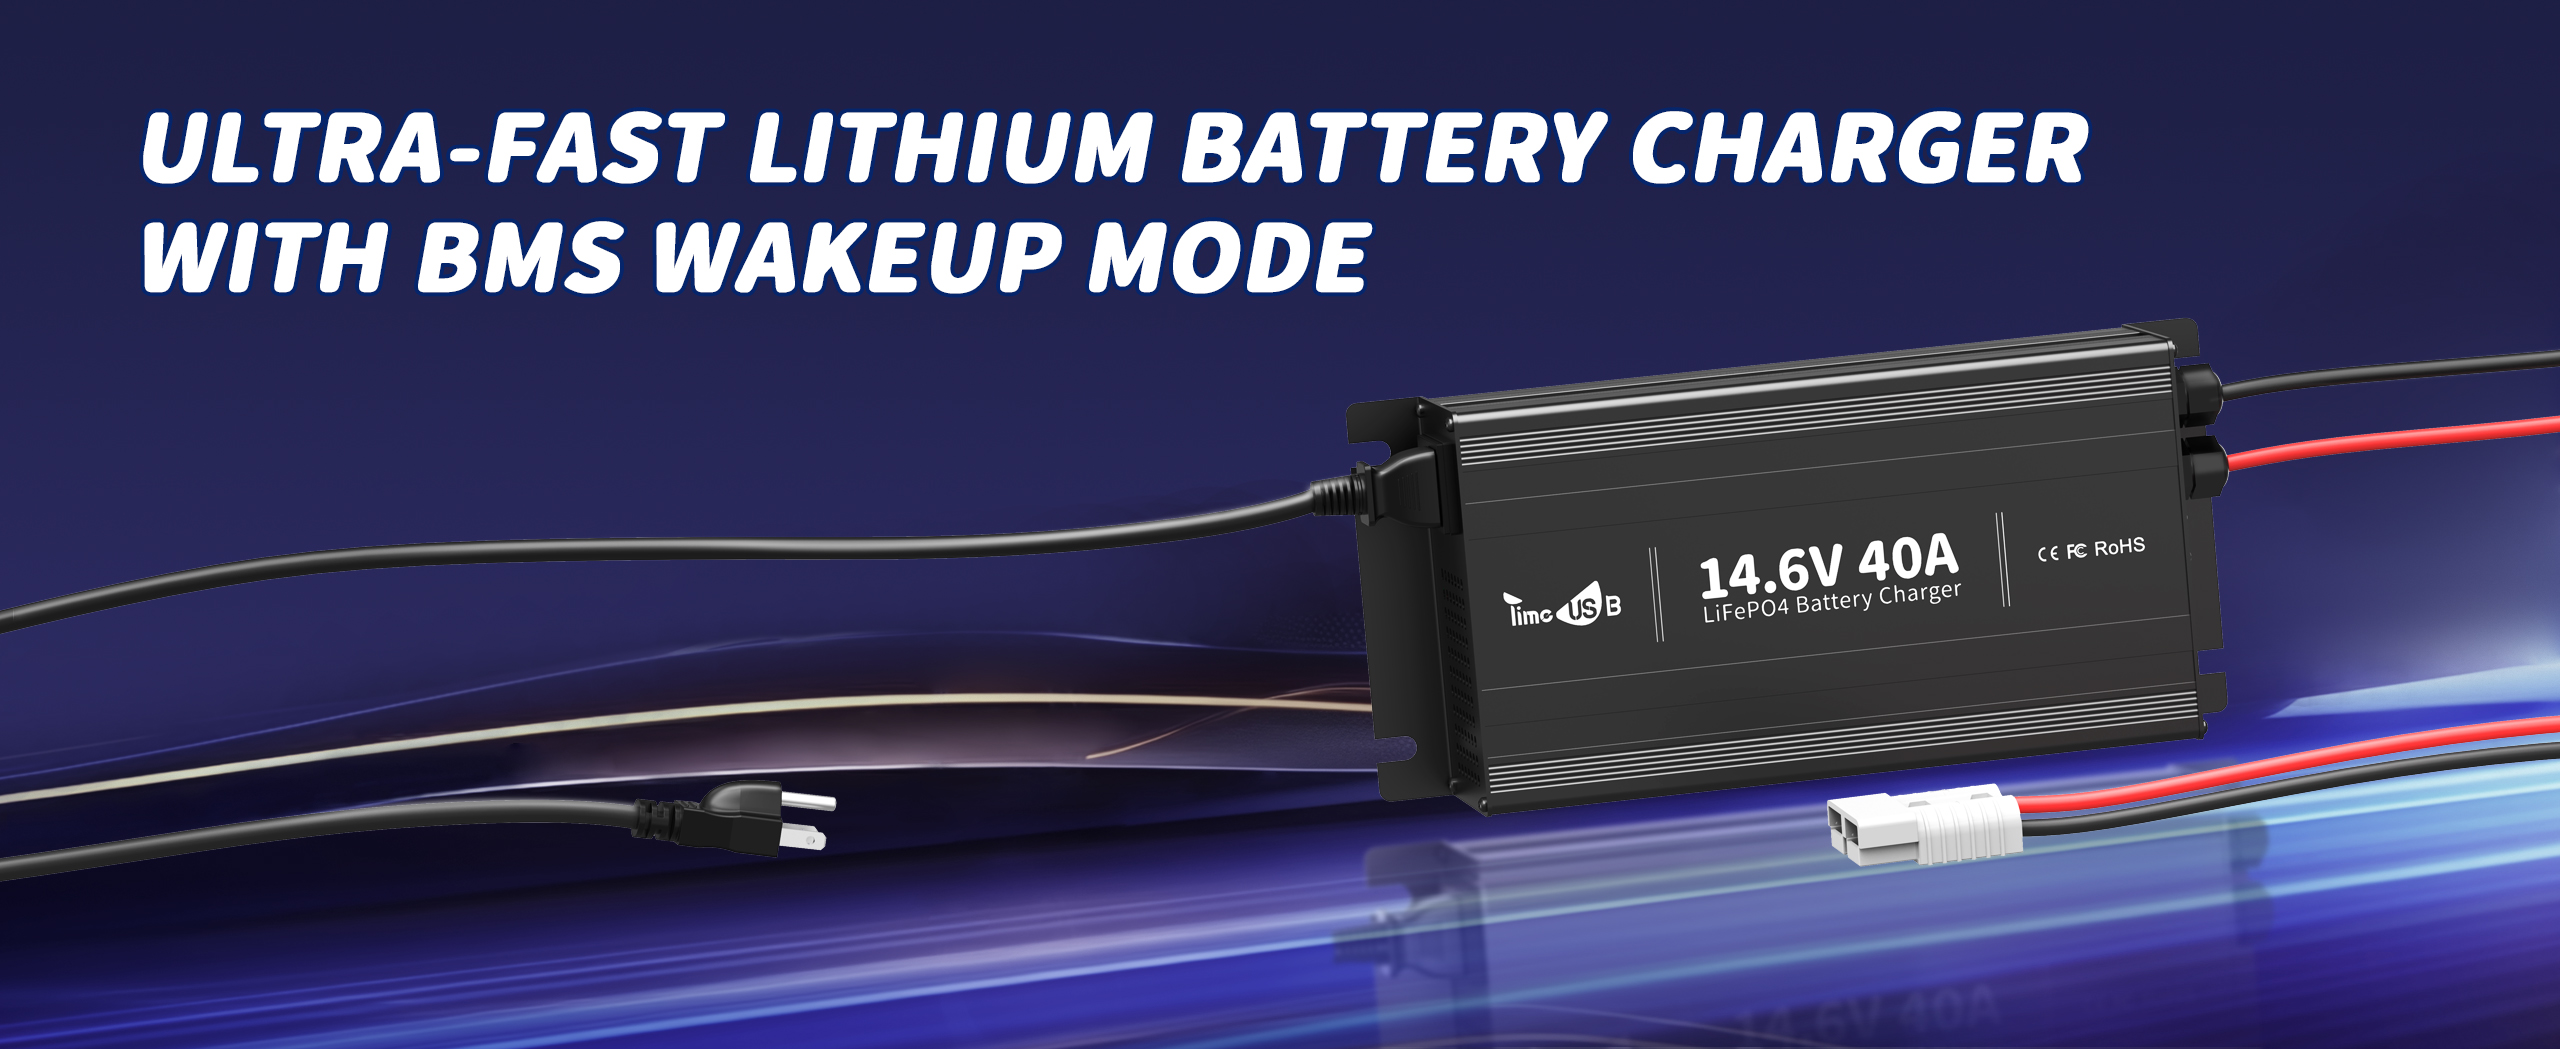 Ultra fast lithium battery charger with BMS wakeup mode for 12v battery charger